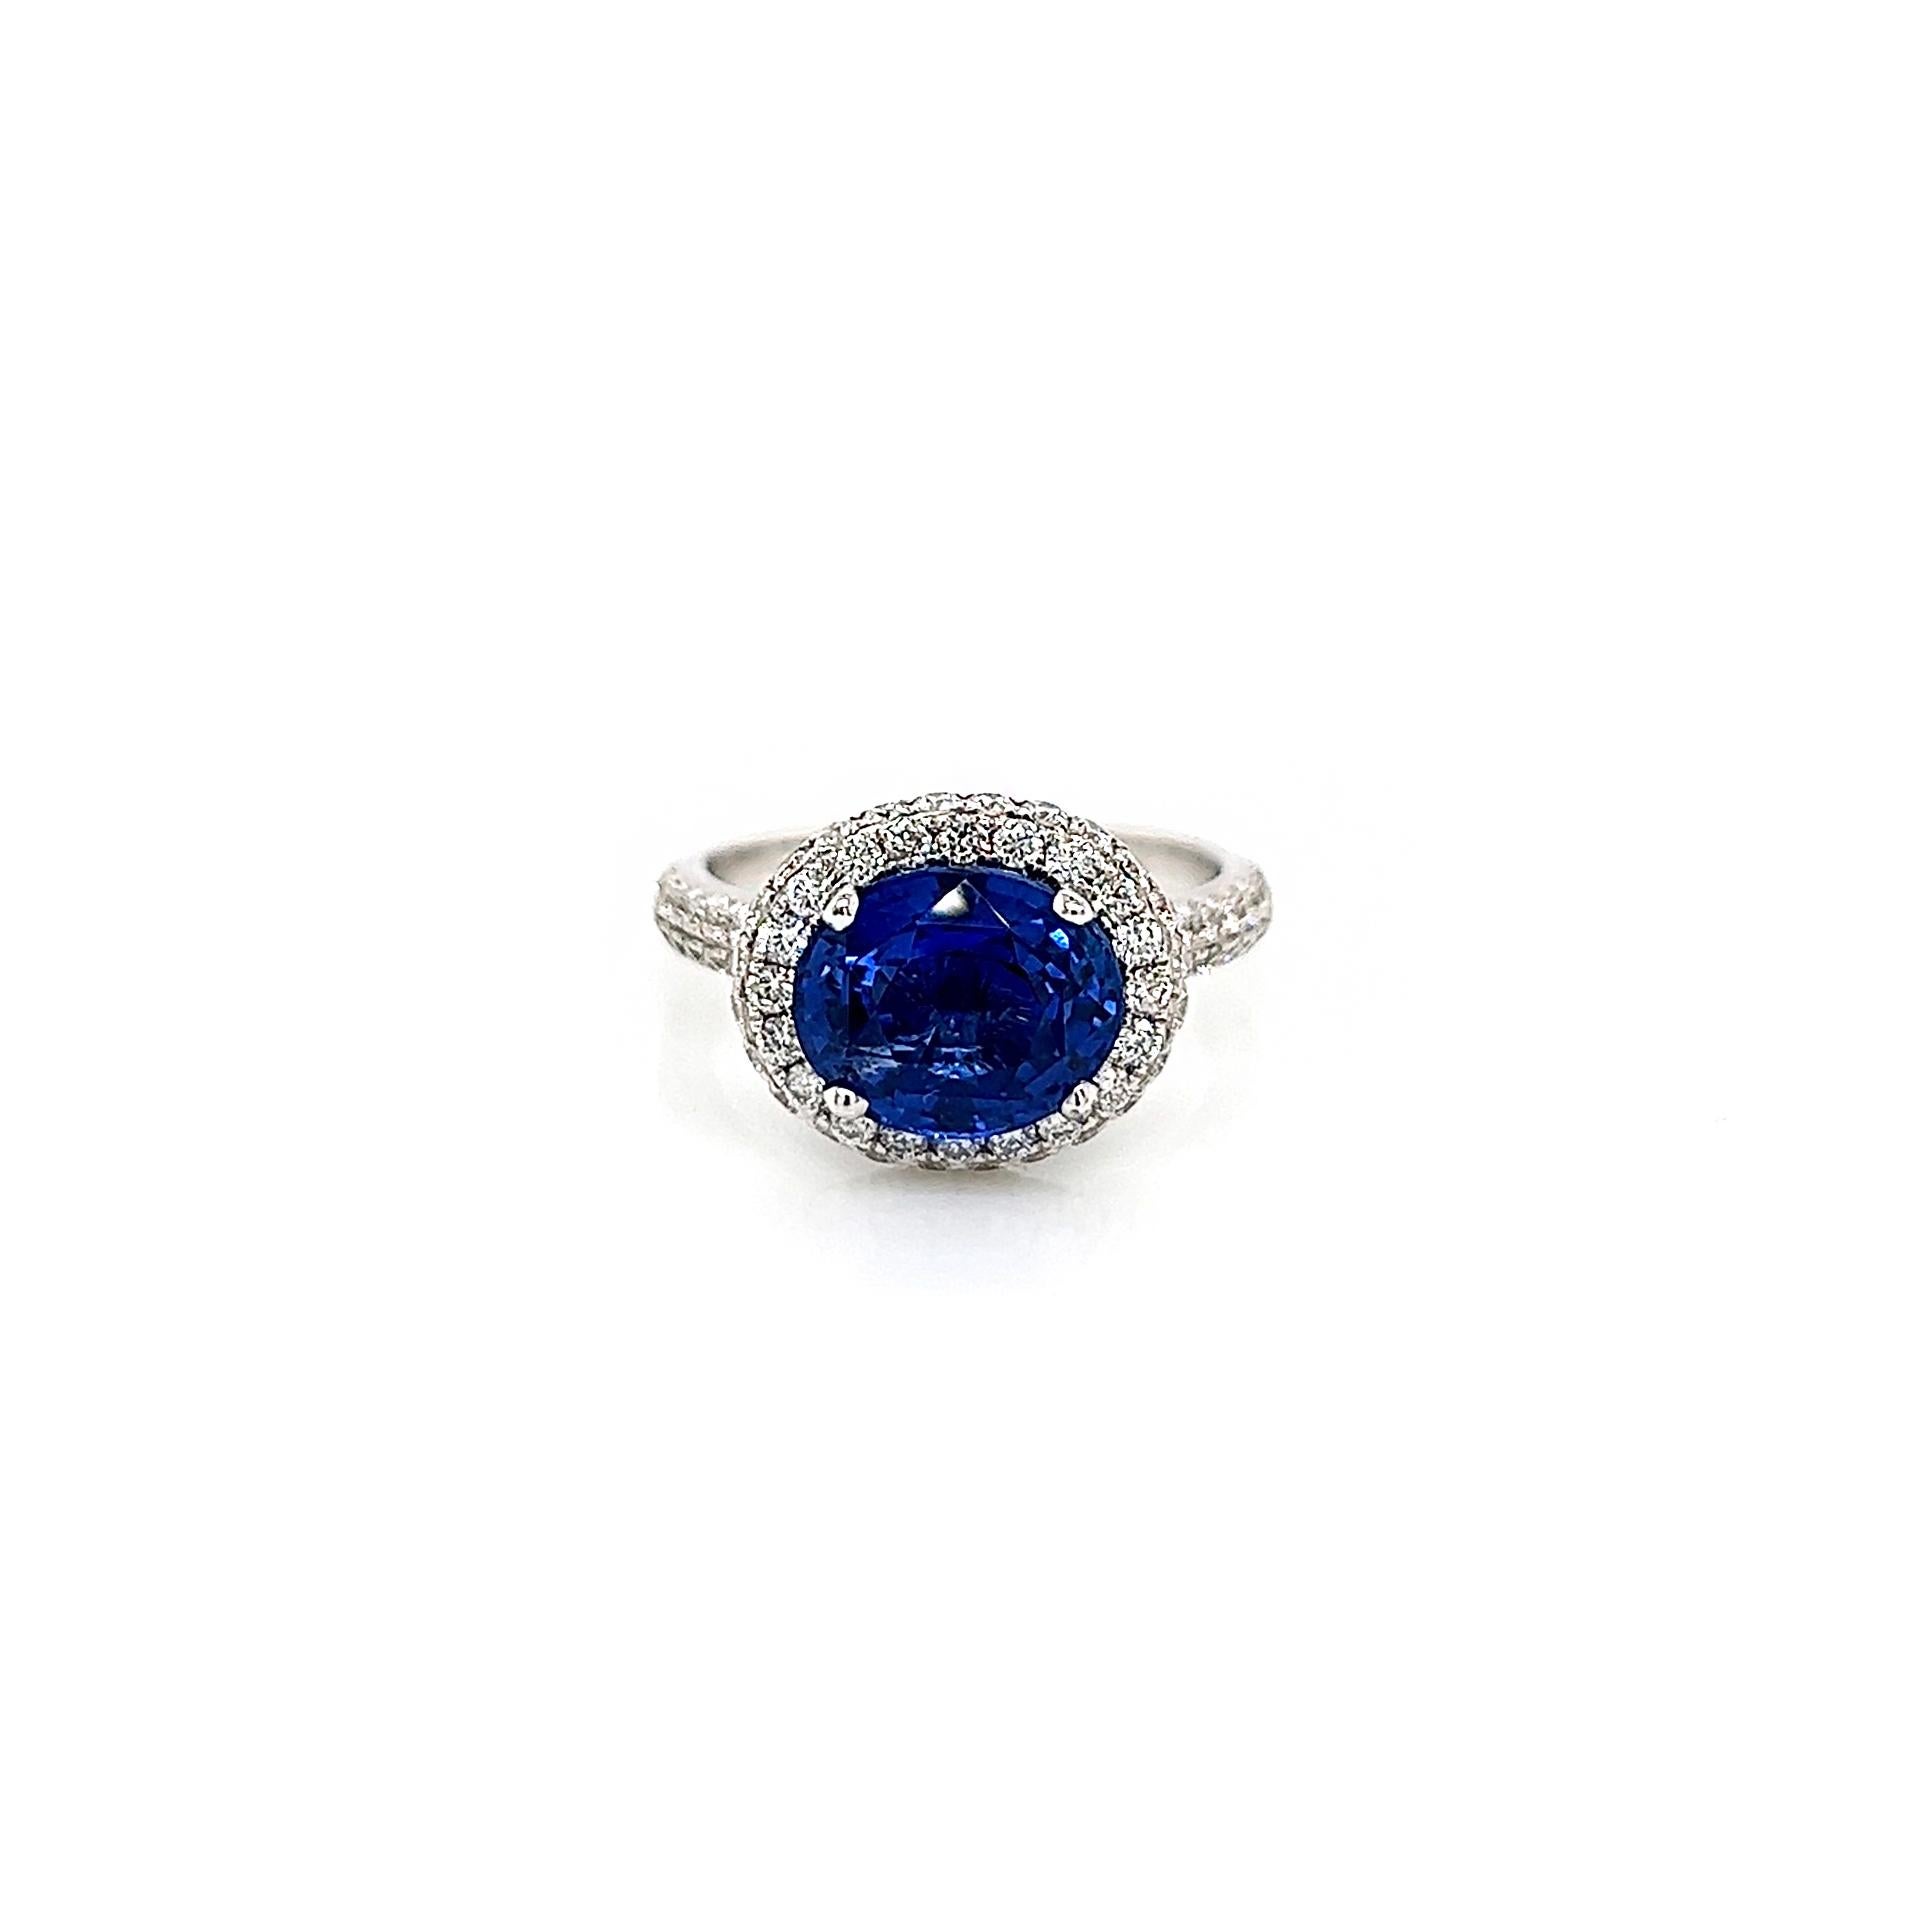 4.40 Total Carat Sapphire and Diamond Halo Pave-Set Ladies Engagement Ring. GIA Certified.

-Metal Type: 18K White Gold
-3.47 Carat Oval Cut Natural Blue Sapphire, GIA Certified 
-0.93 Carat Round Natural Diamonds. F-G Color, VS1-VS2 Clarity 
-Size